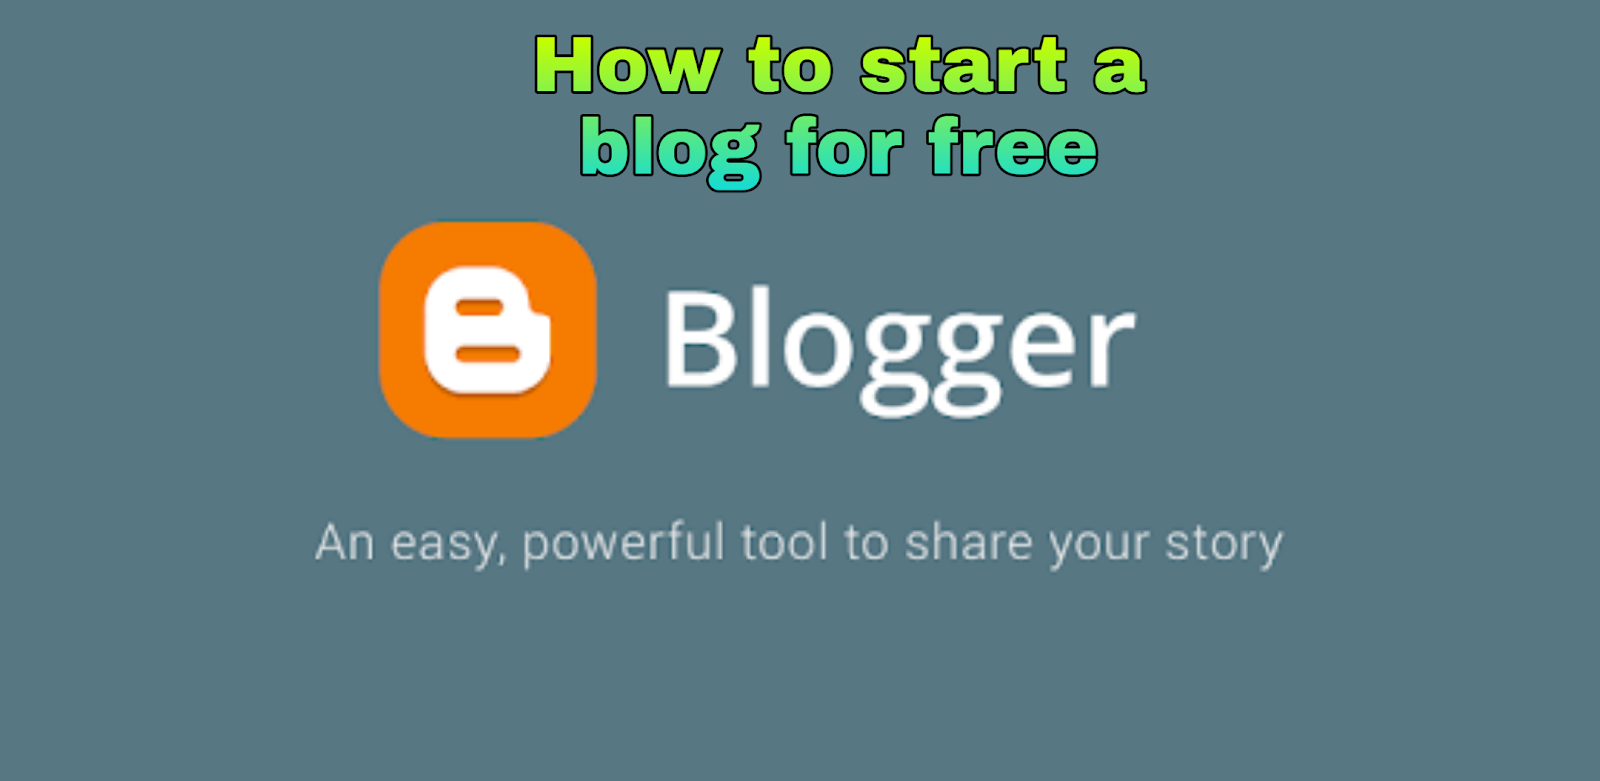 how to start a blog for free and make money in 15